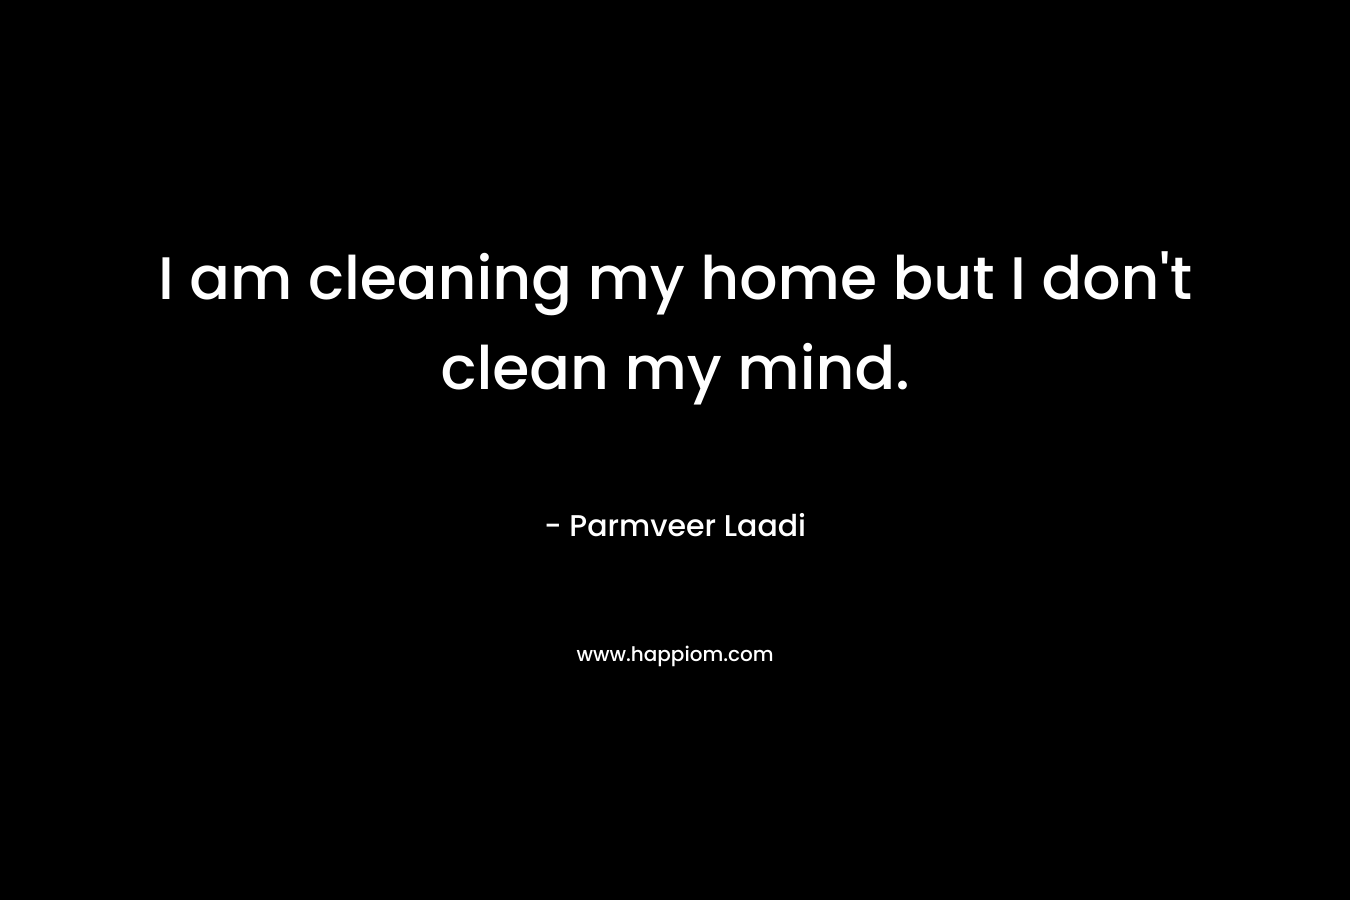 I am cleaning my home but I don’t clean my mind. – Parmveer Laadi